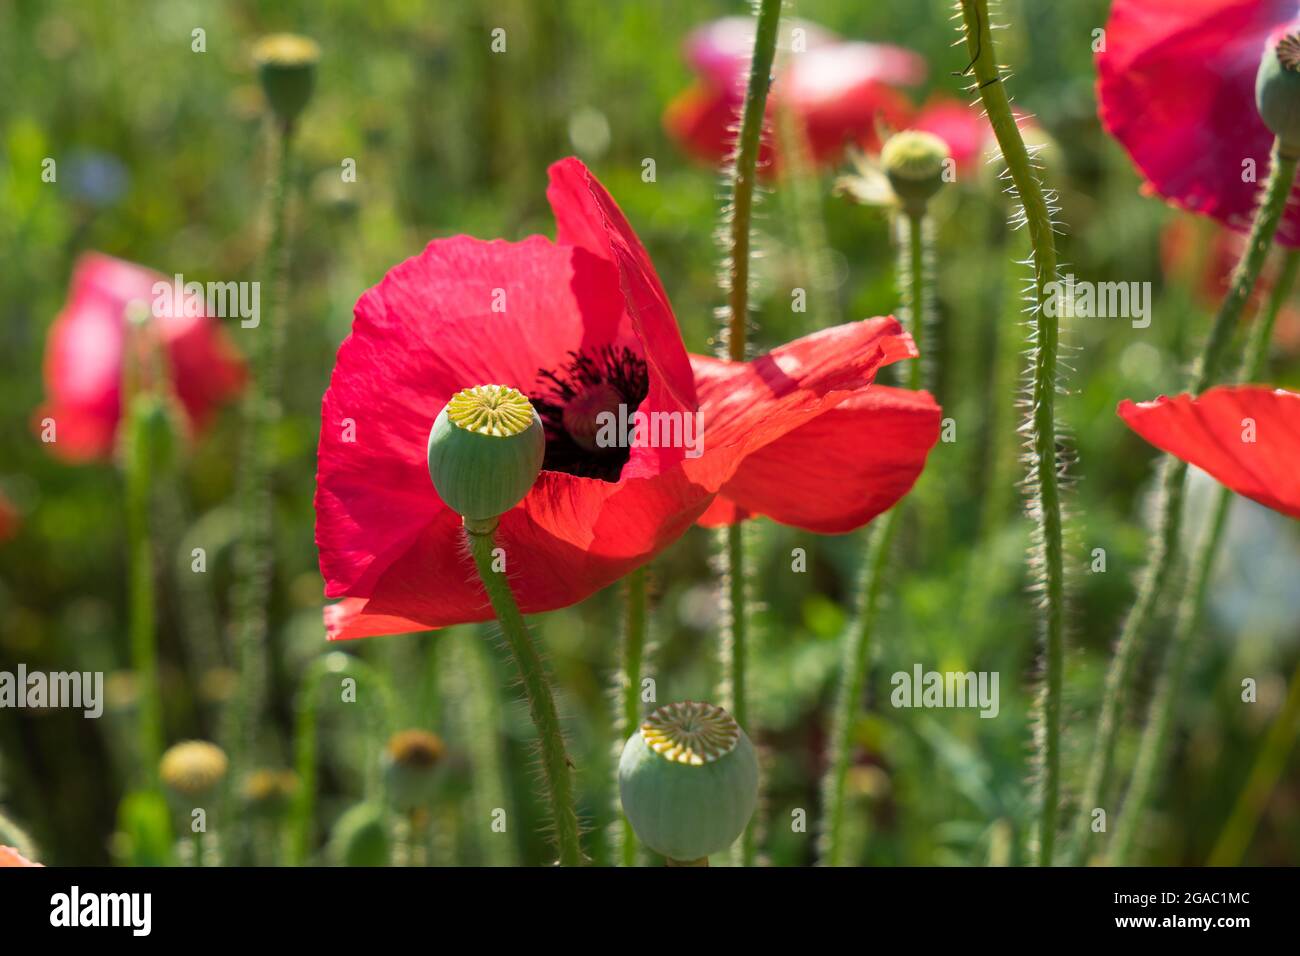 red poppy flower and seed capsule in the summer sun botany close-up Stock Photo